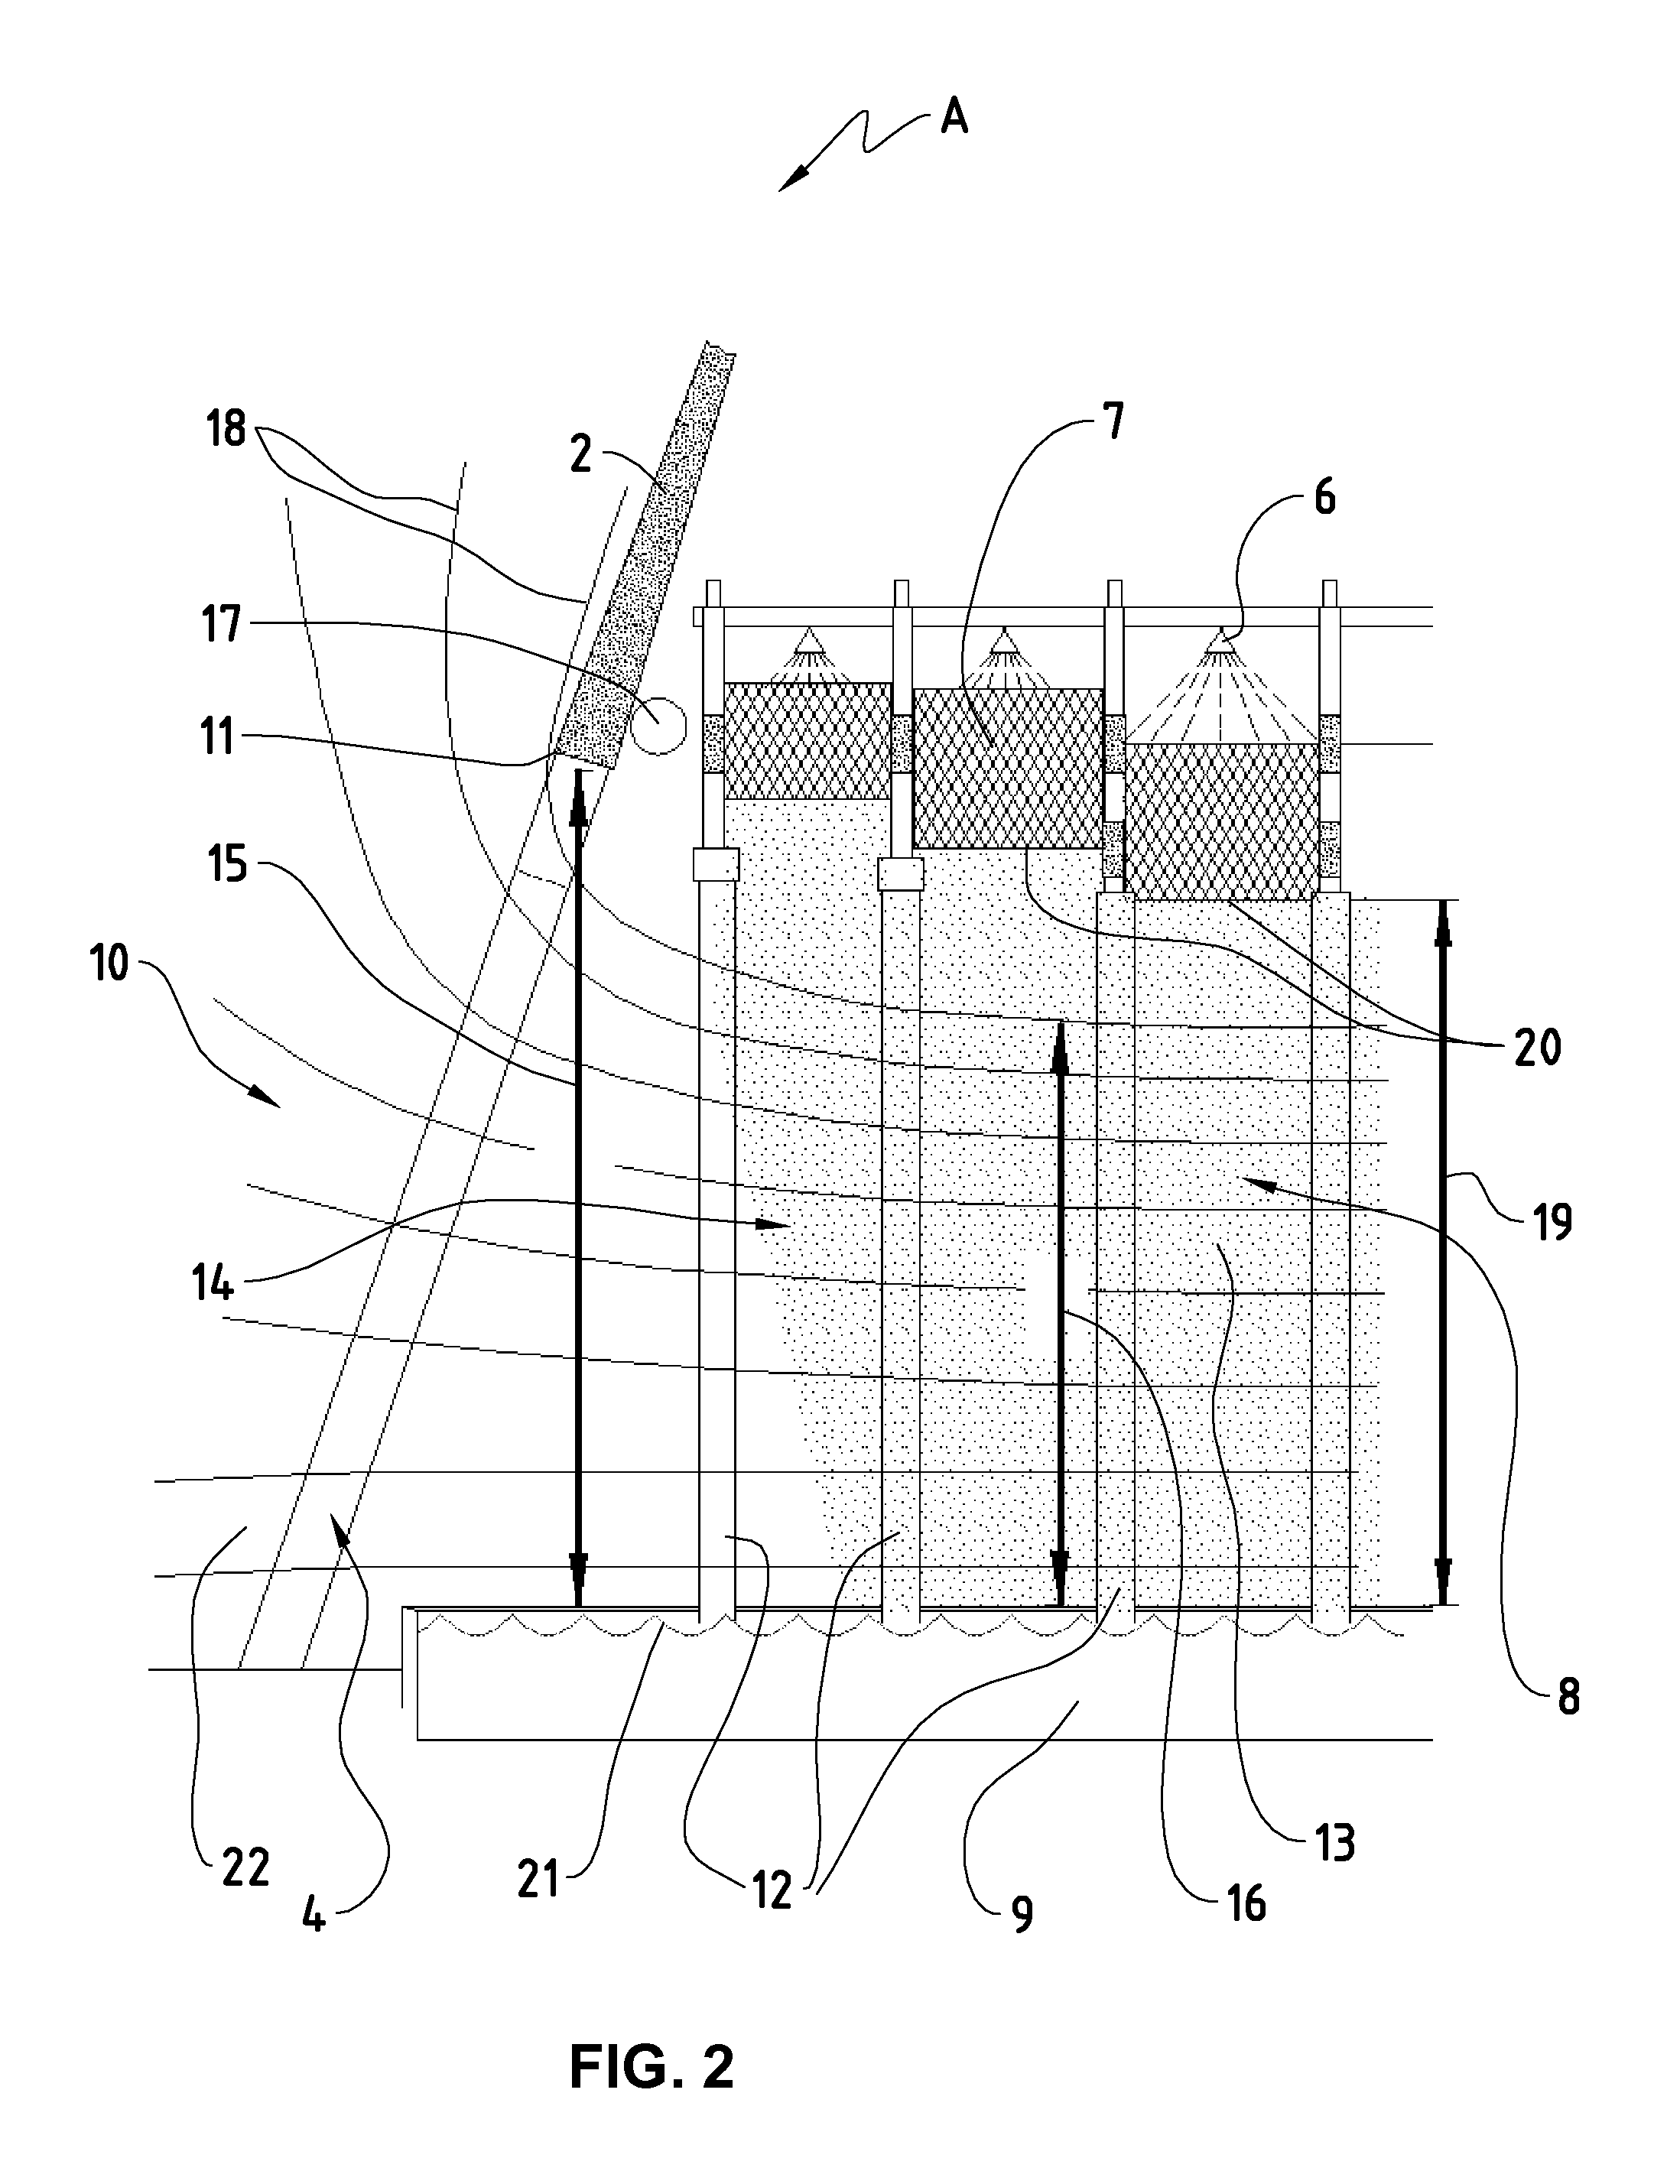 Air introduction system and method for cooling towers